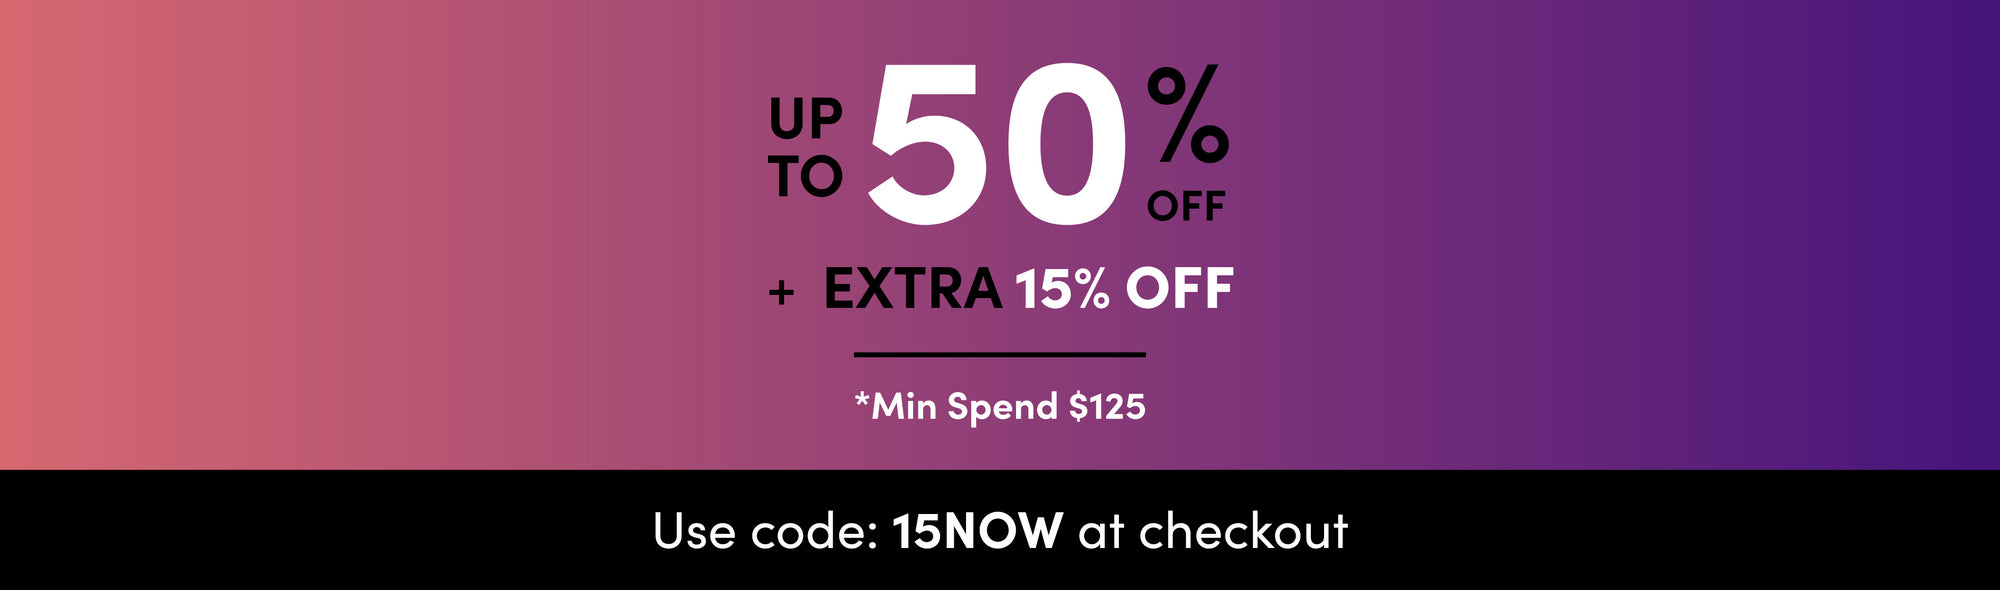 Up to 50% off + extra 15% off